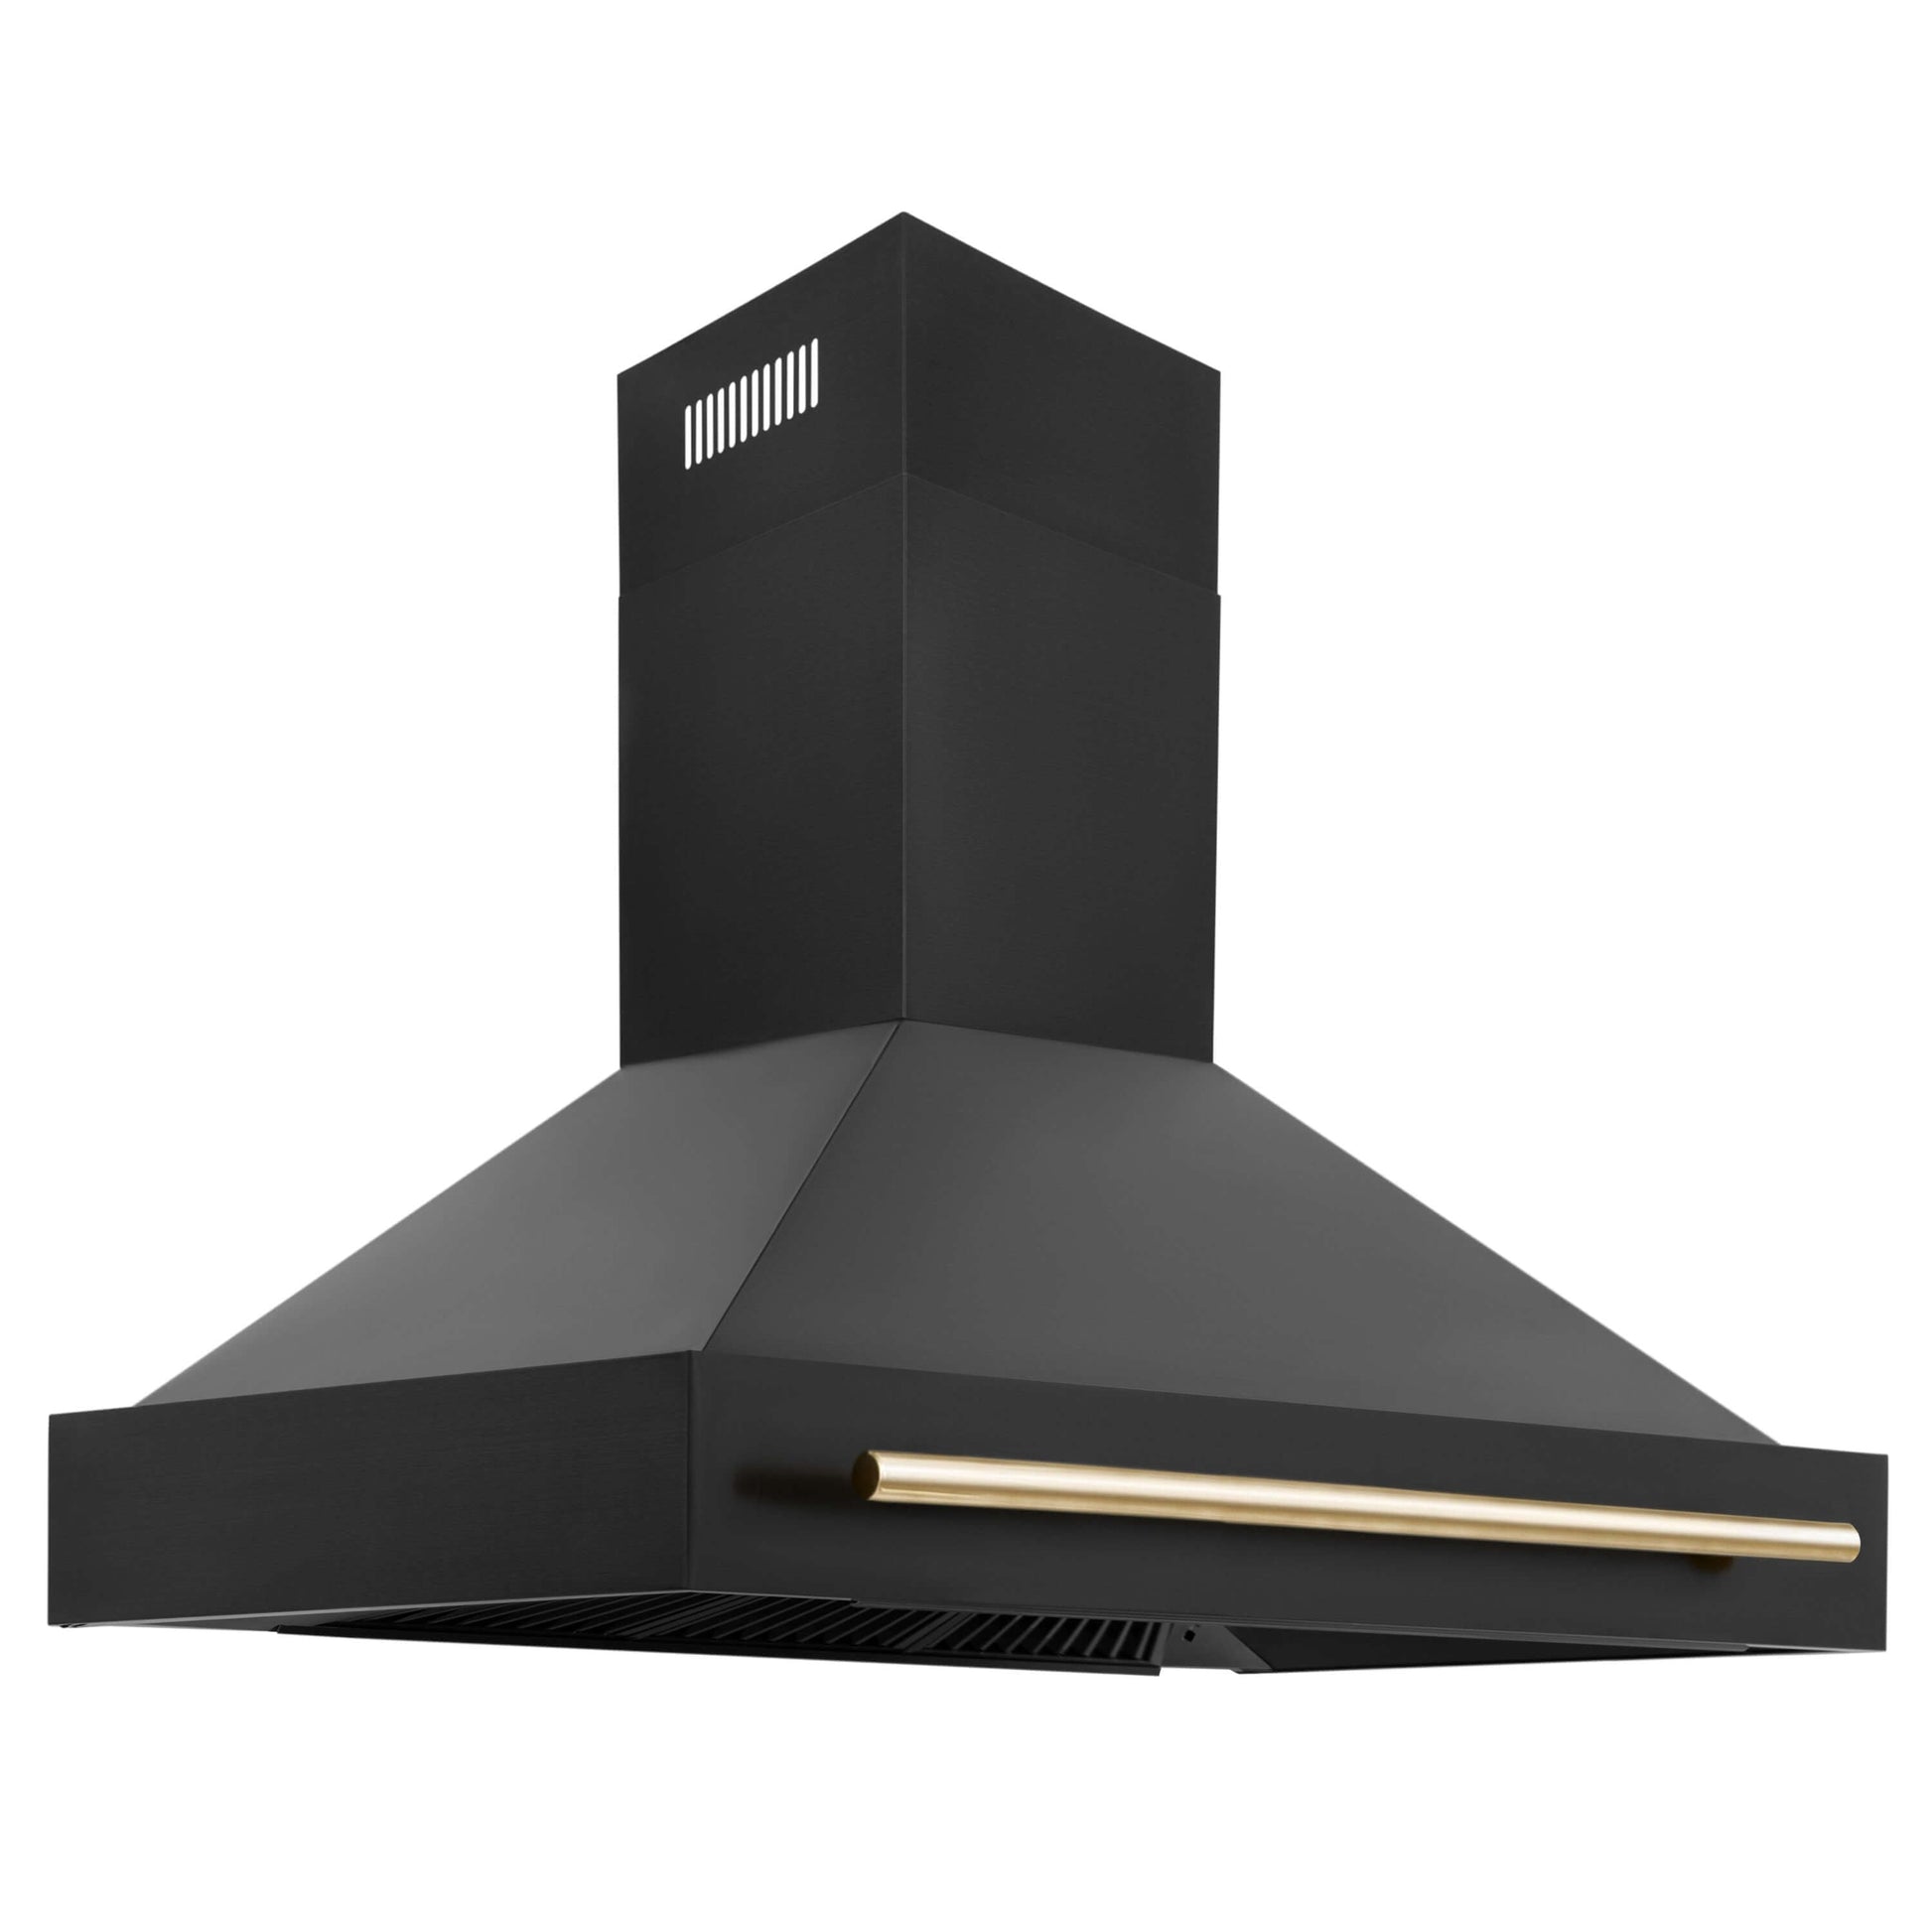 ZLINE 4-Appliance 48" Autograph Edition Kitchen Package with Black Stainless Steel Dual Fuel Range, Range Hood, Dishwasher, and Refrigeration Including External Water Dispenser with Polished Gold Accents